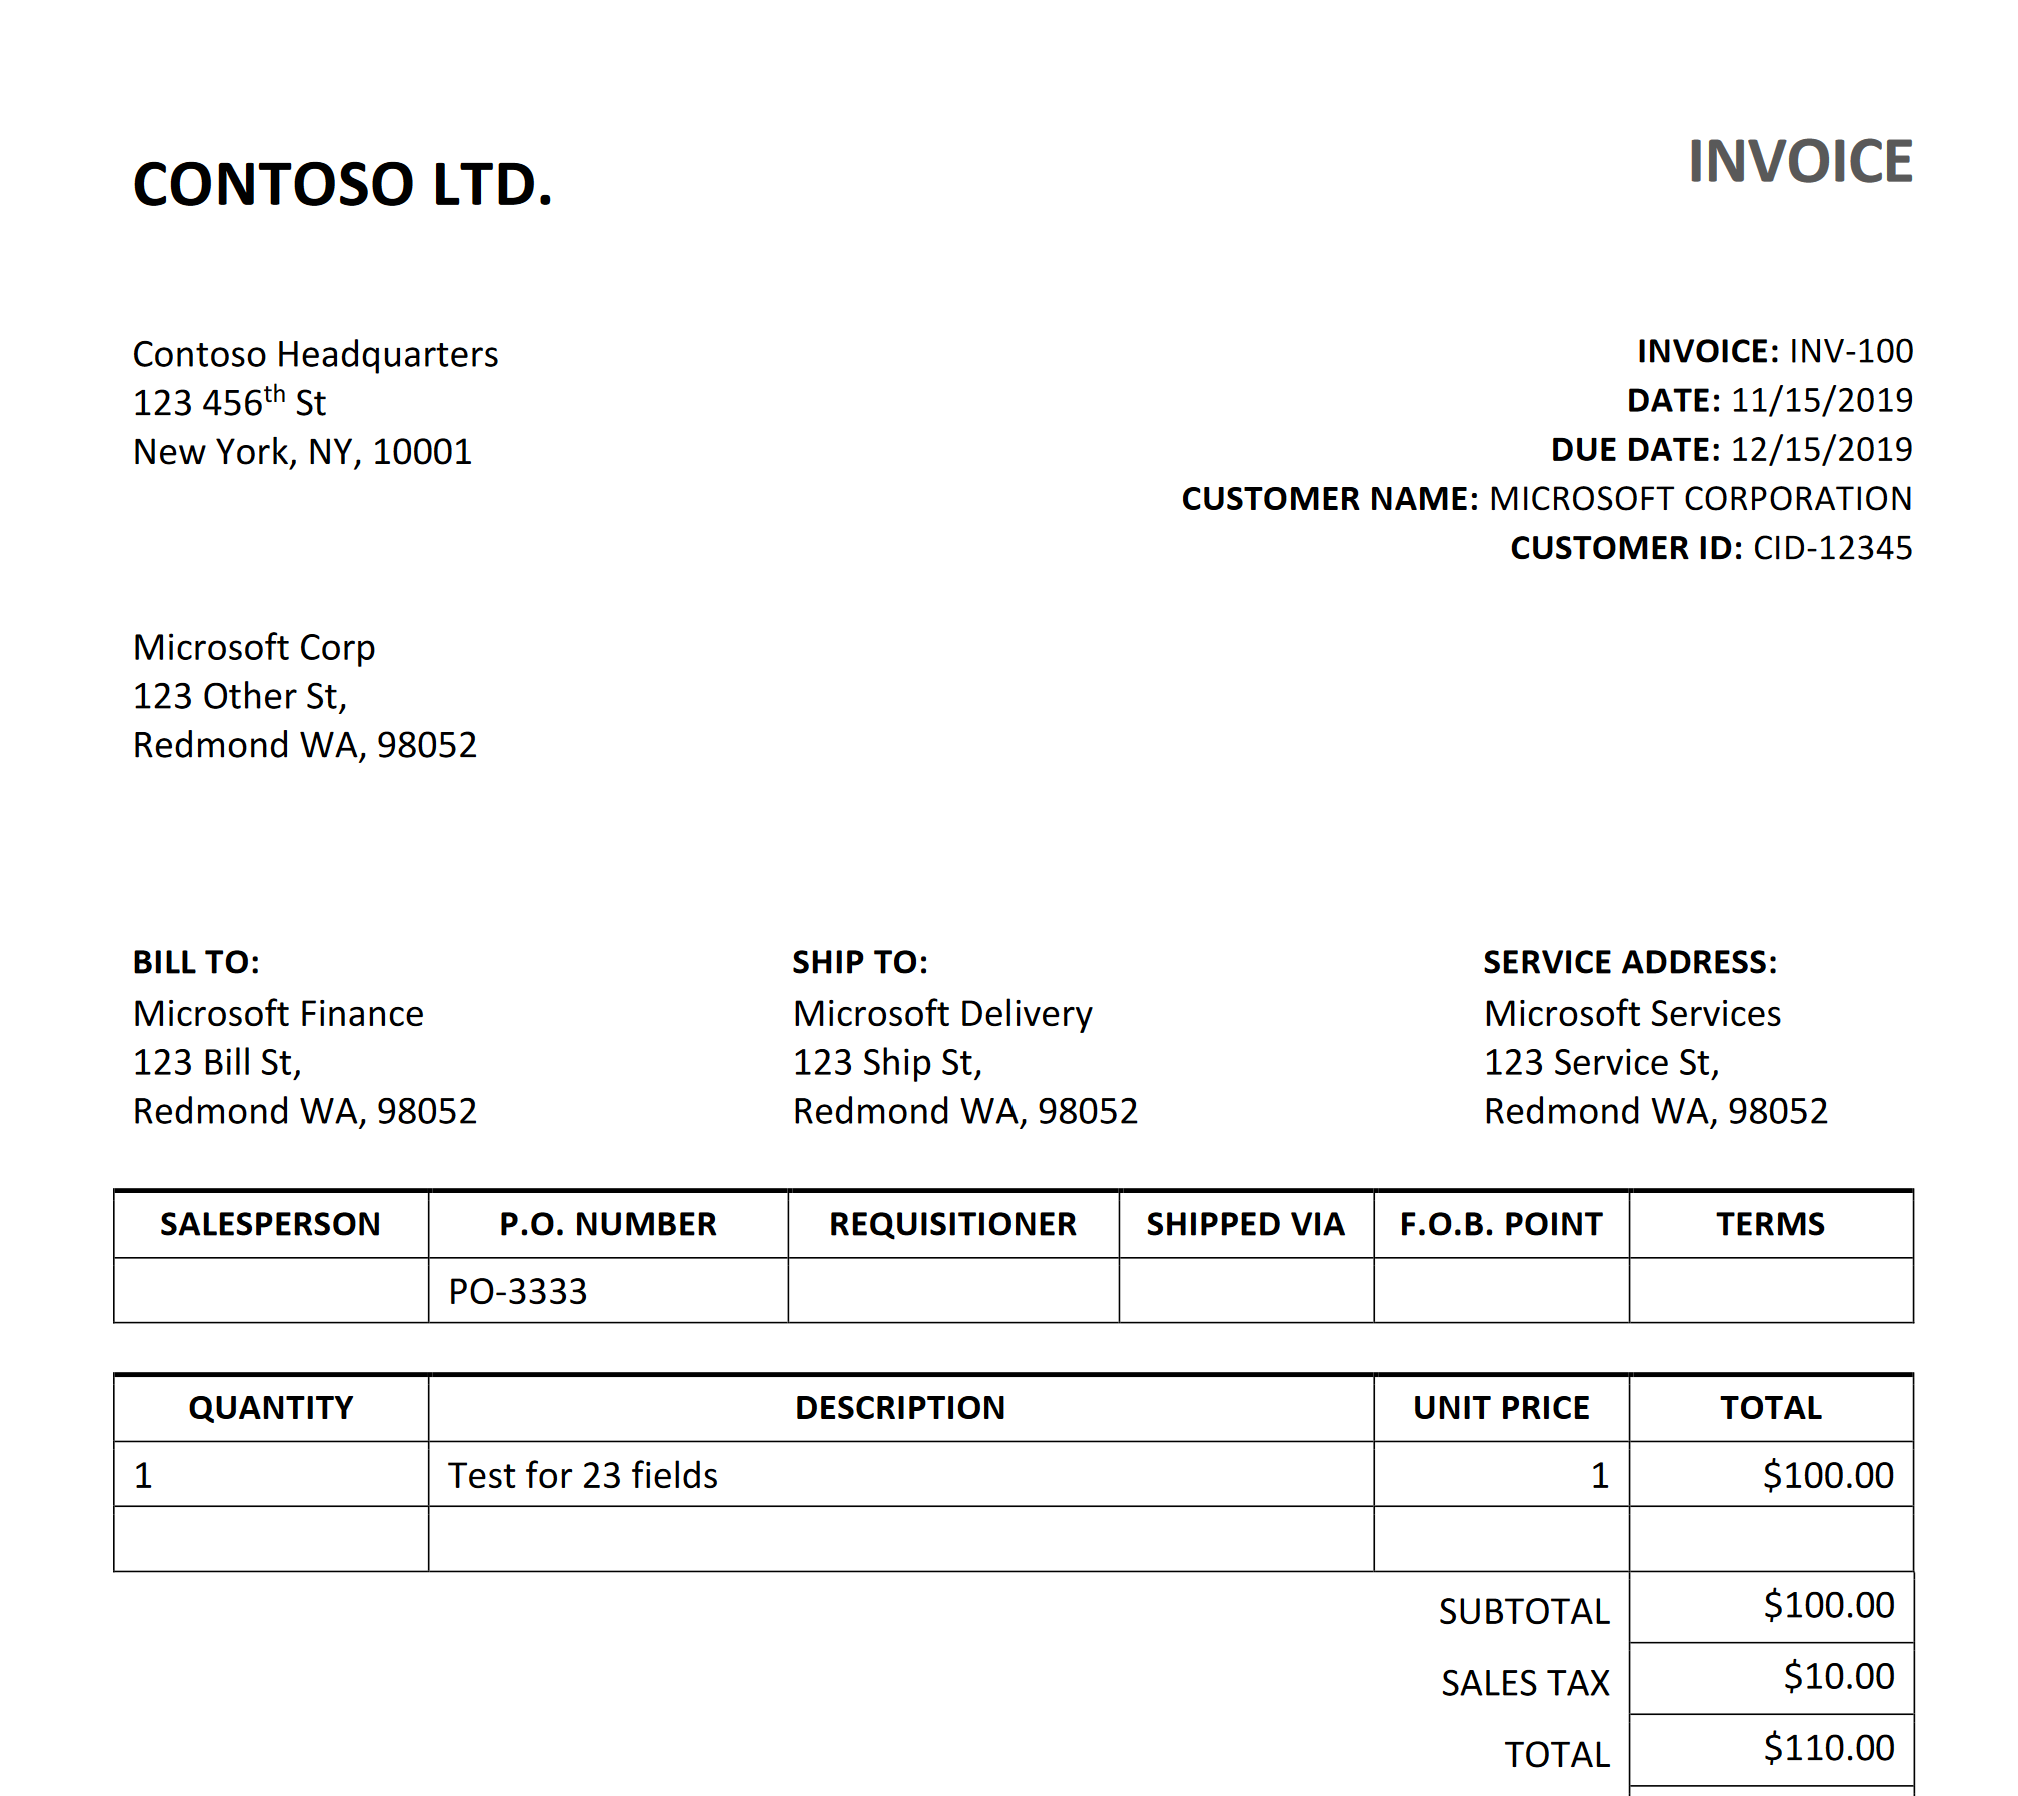 Screenshot showing a sample invoice document.